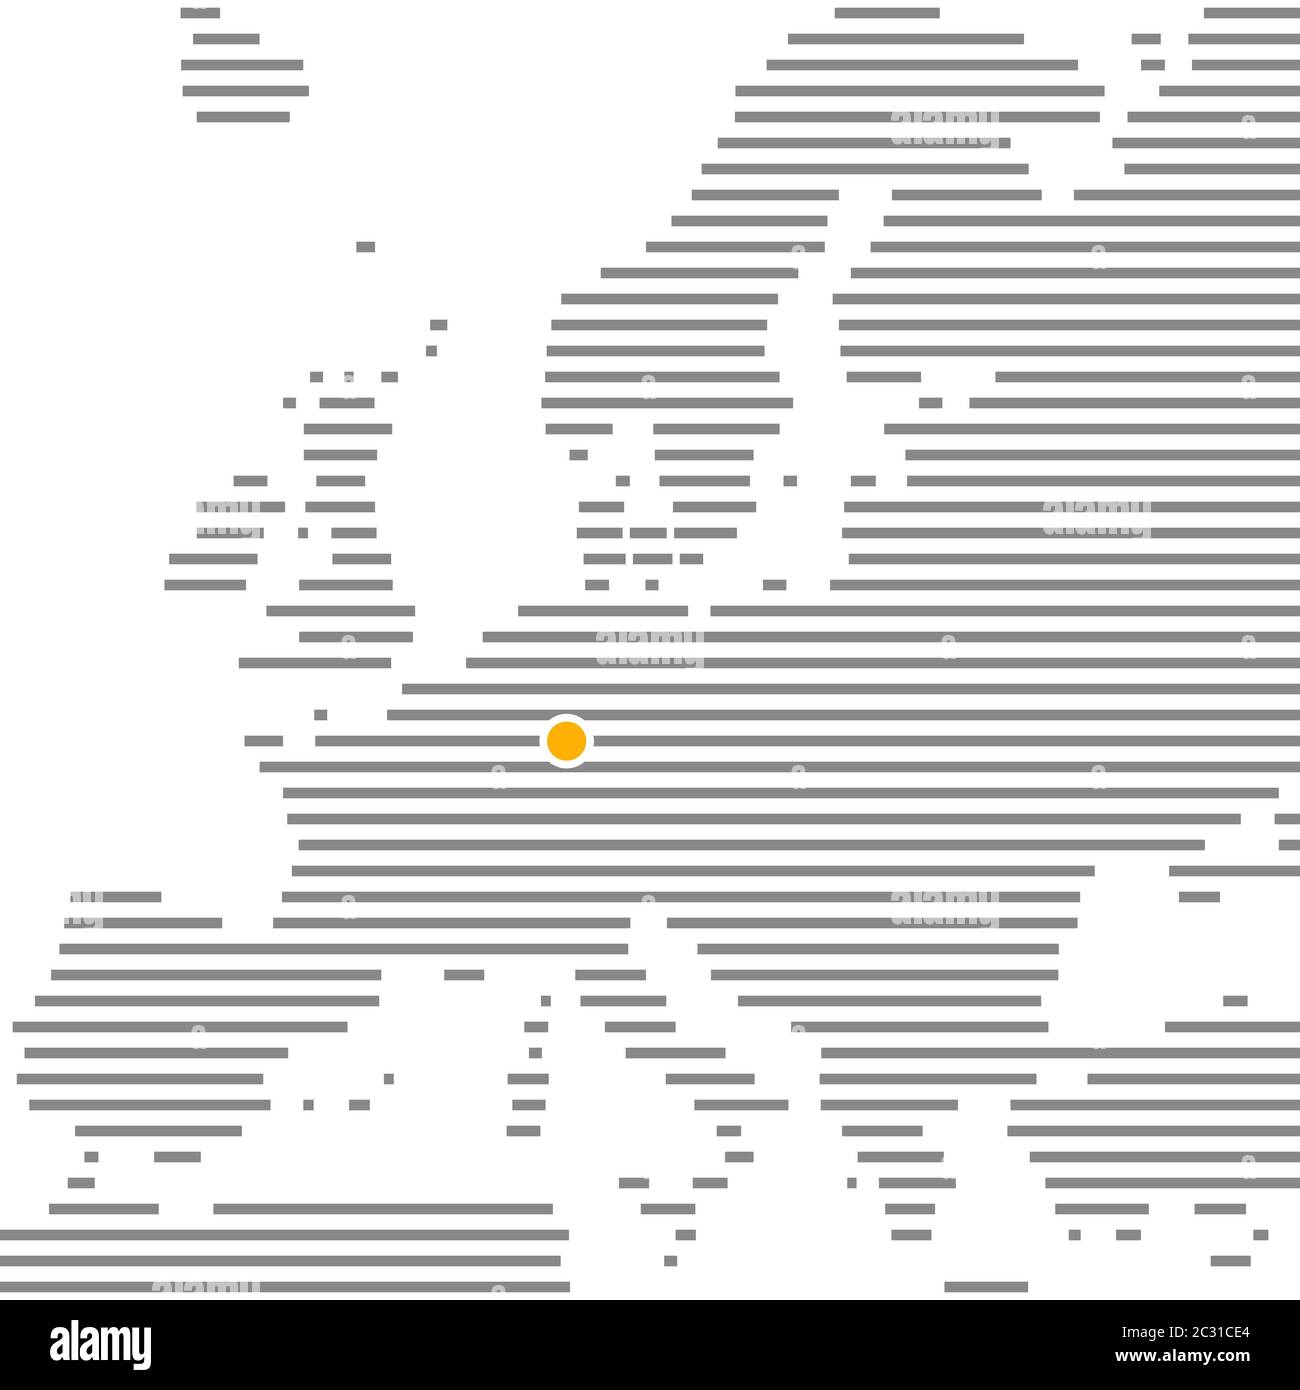 City Frankfurt in Germany on grey striped map of Europe with orange dot Stock Photo